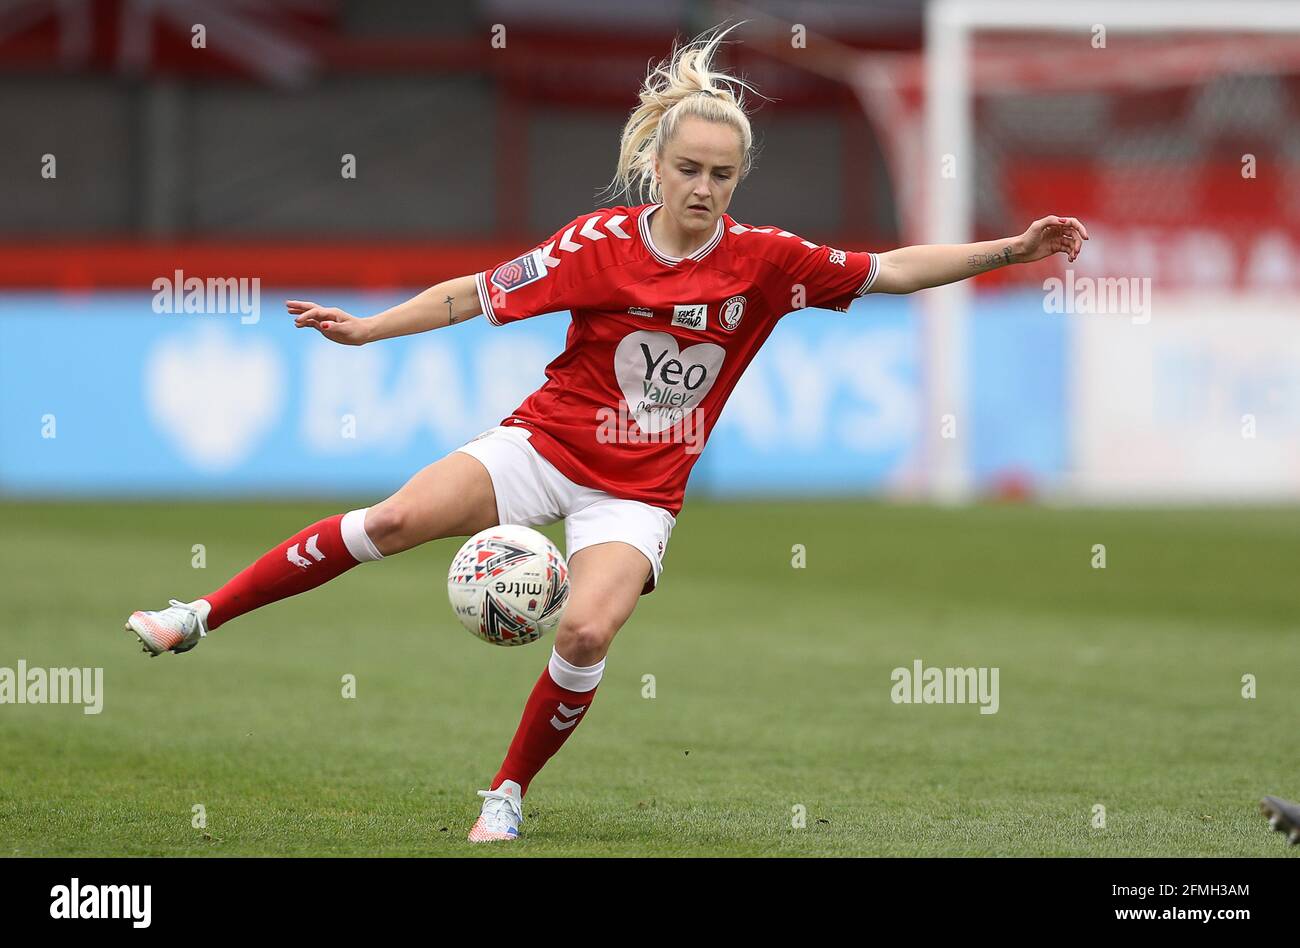 Crawley, UK. 9th May 2021. Faye Bryson of Bristol City during the FA Women's Super League match between Brighton & Hove Albion Women and Bristol City Women at The People's Pension Stadium on May 9th 2021 in Crawley, United Kingdom Stock Photo